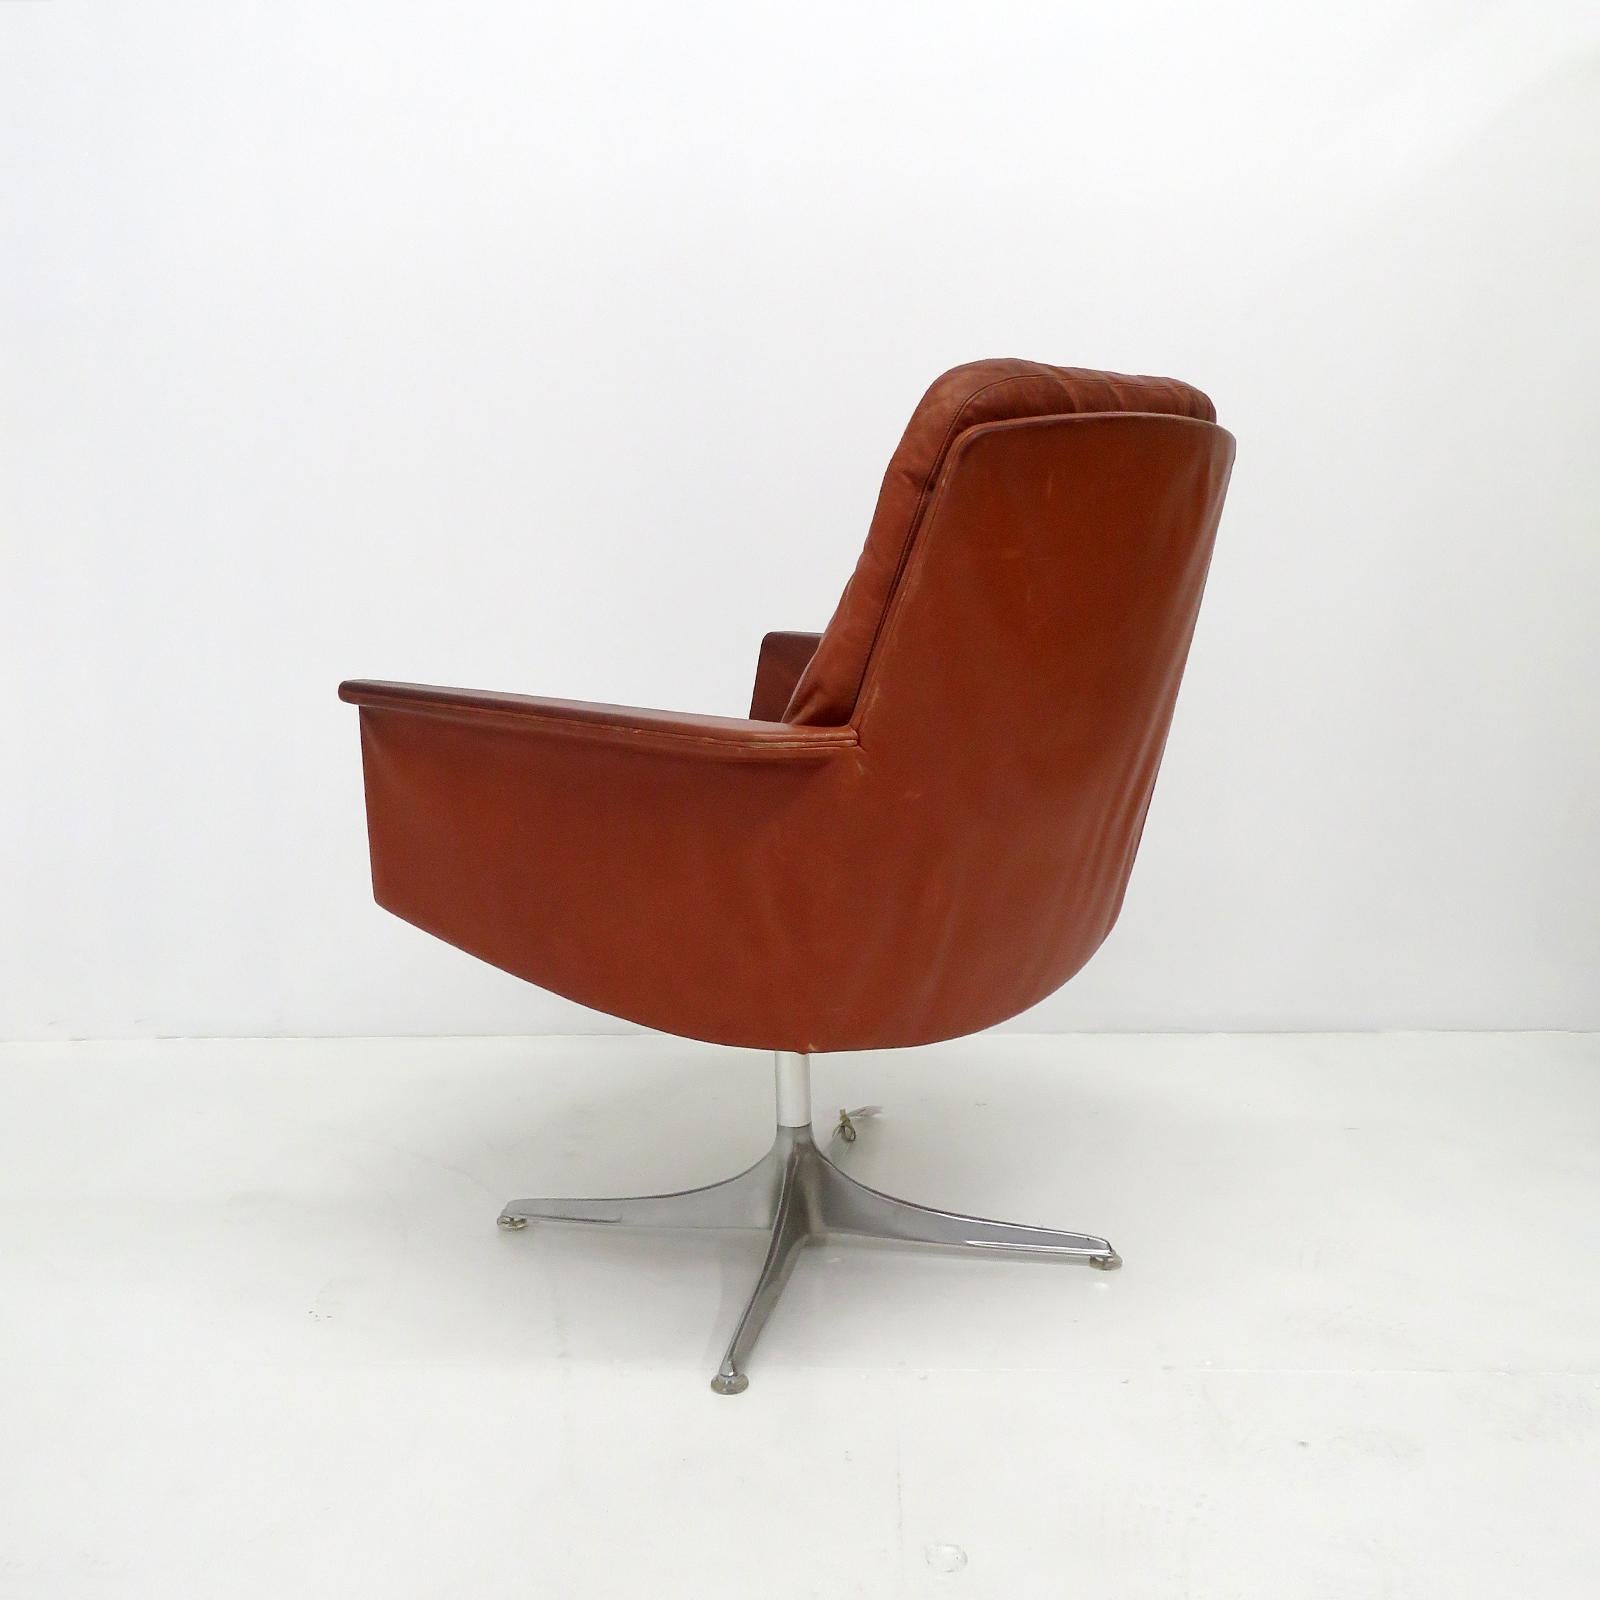 Mid-20th Century Pair of Horst Brüning Sedia Lounge Chairs for Kill International, 1960s For Sale